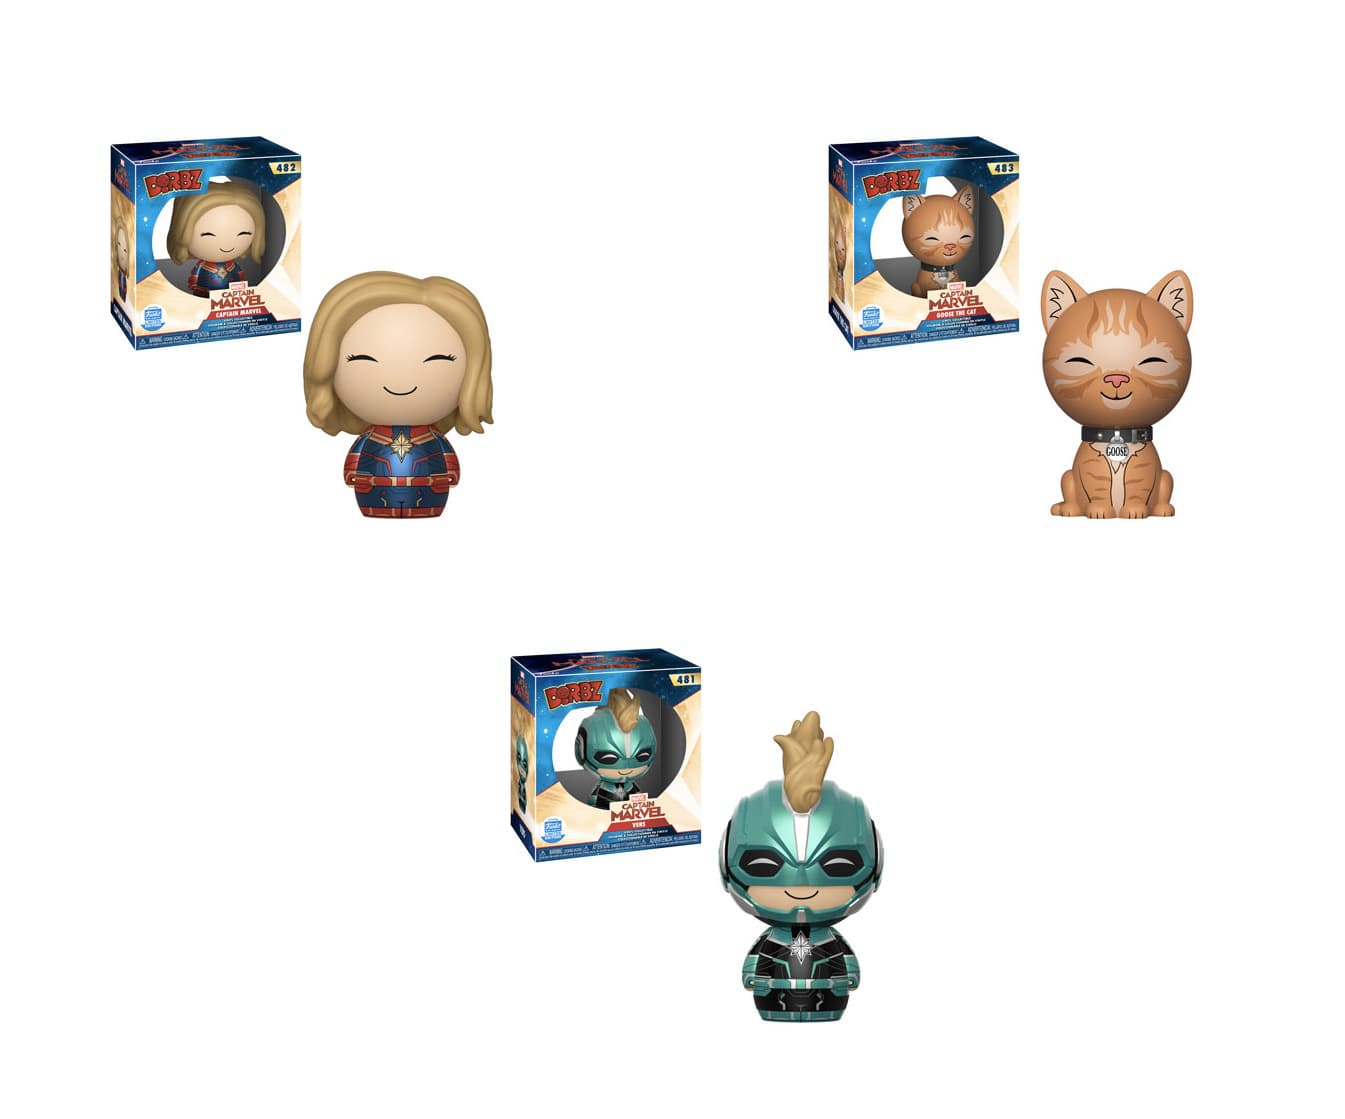 If you’re looking for Captain Marvel characters with an adorable edge, Captain Marvel, her beloved pet Goose the Cat, and Vers are available as adorable Dorbz figures available as Funko Shop exclusives.